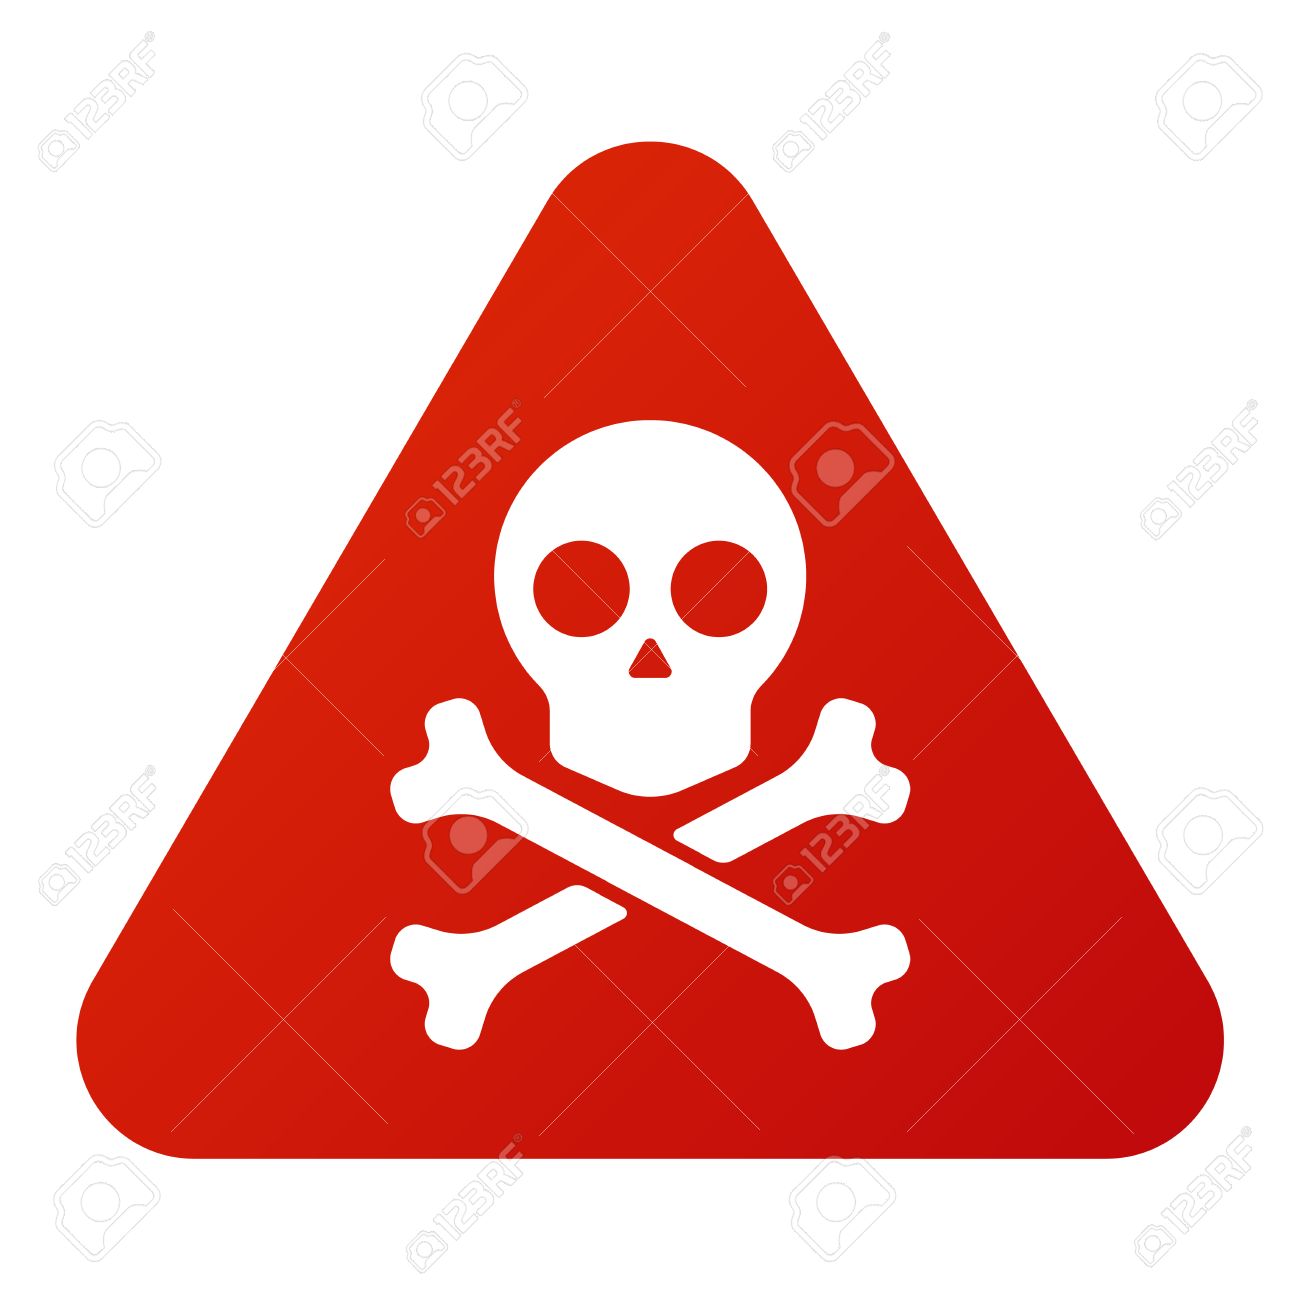 The attention icon Danger symbol Flat Royalty Free Vector